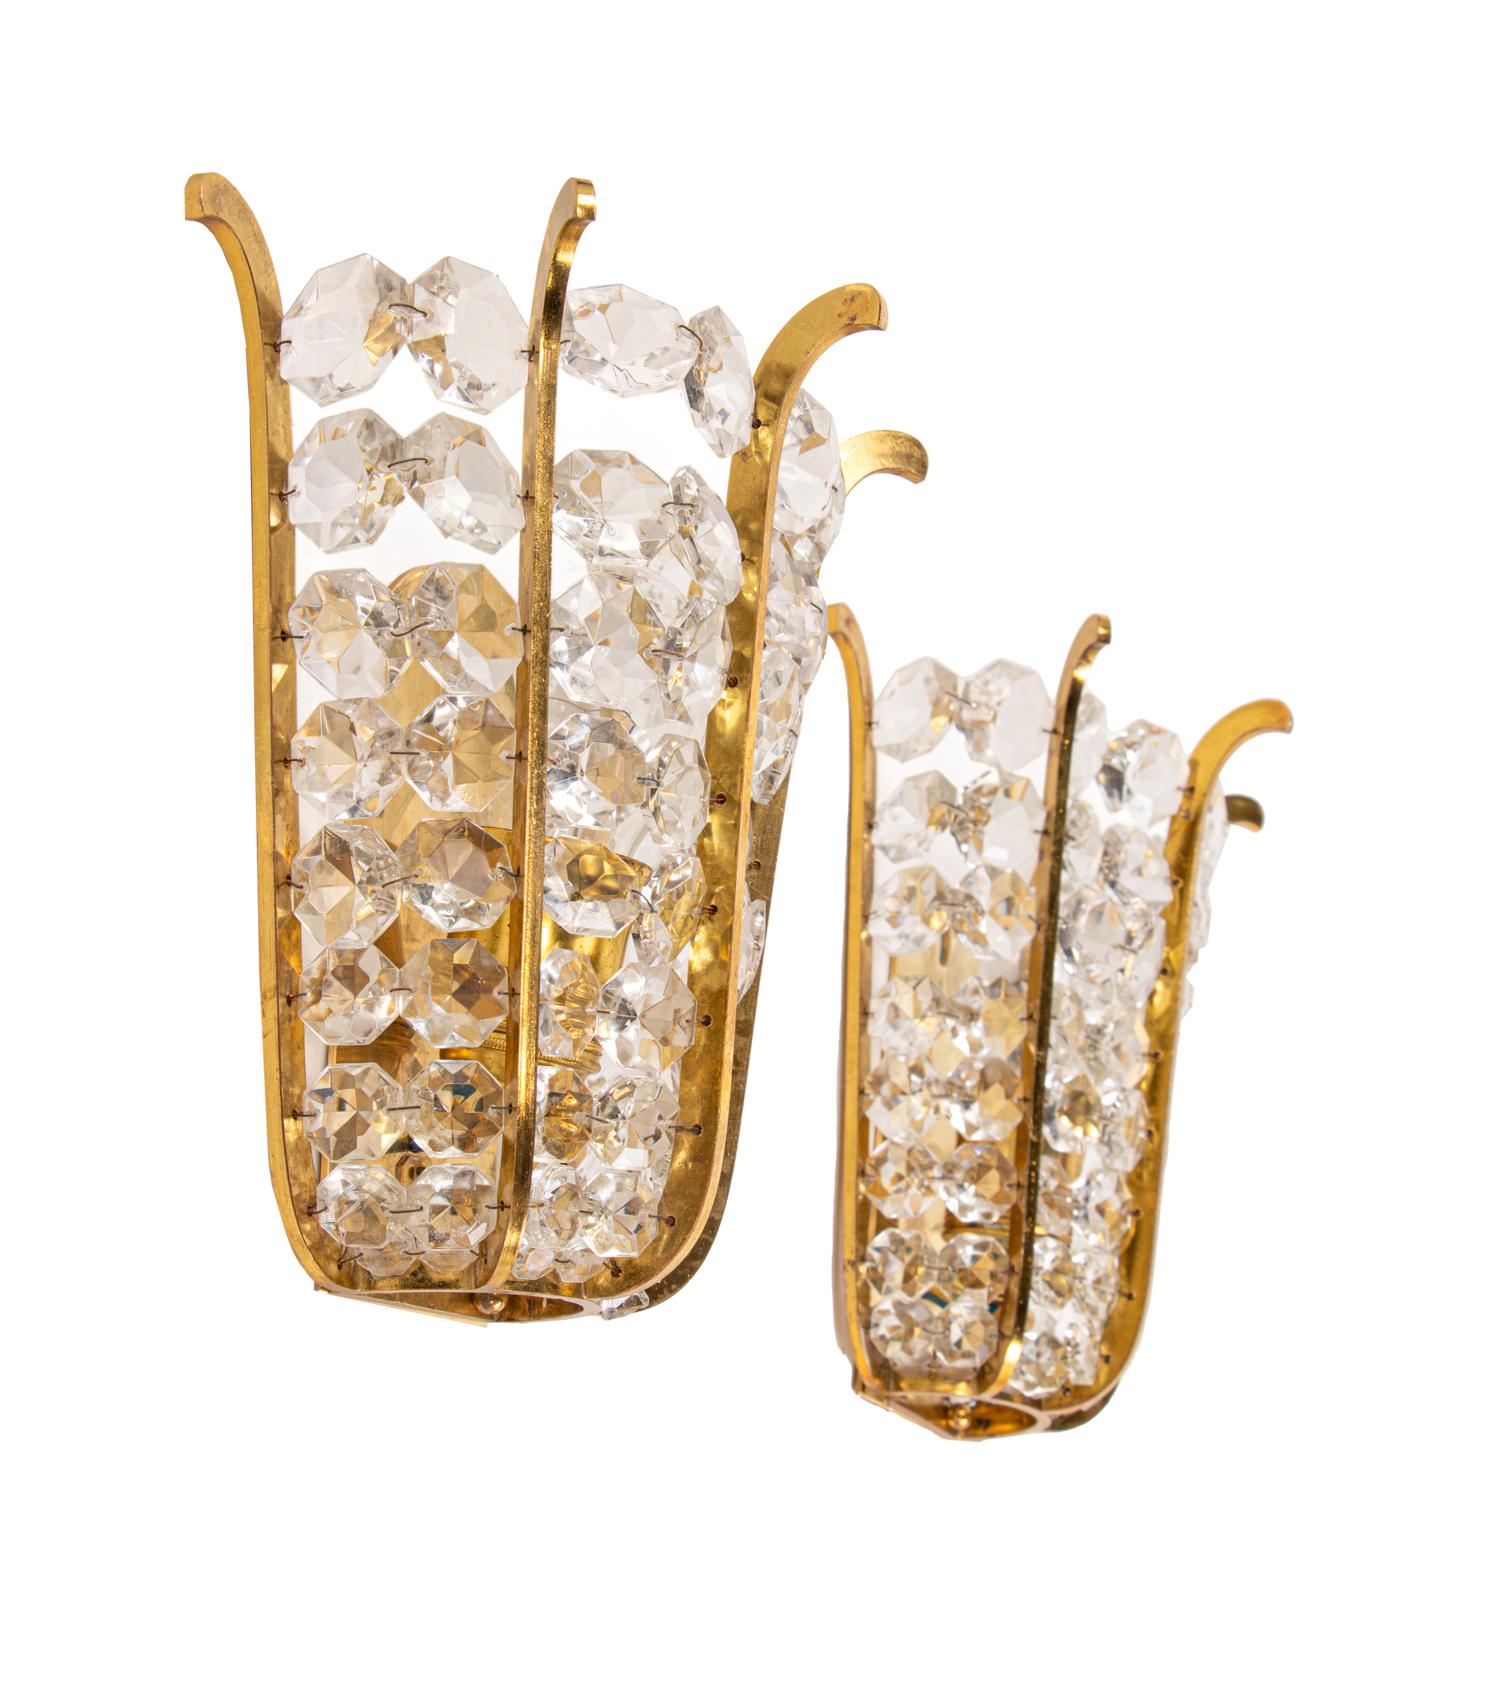 Elegant sconces with faceted crystals mounted on a brass wall frame. High quality workmanship. Manufactured by Bakalowits & Sons, Vienna, Austria in the 1960s. 
 
Measures: width 8.7